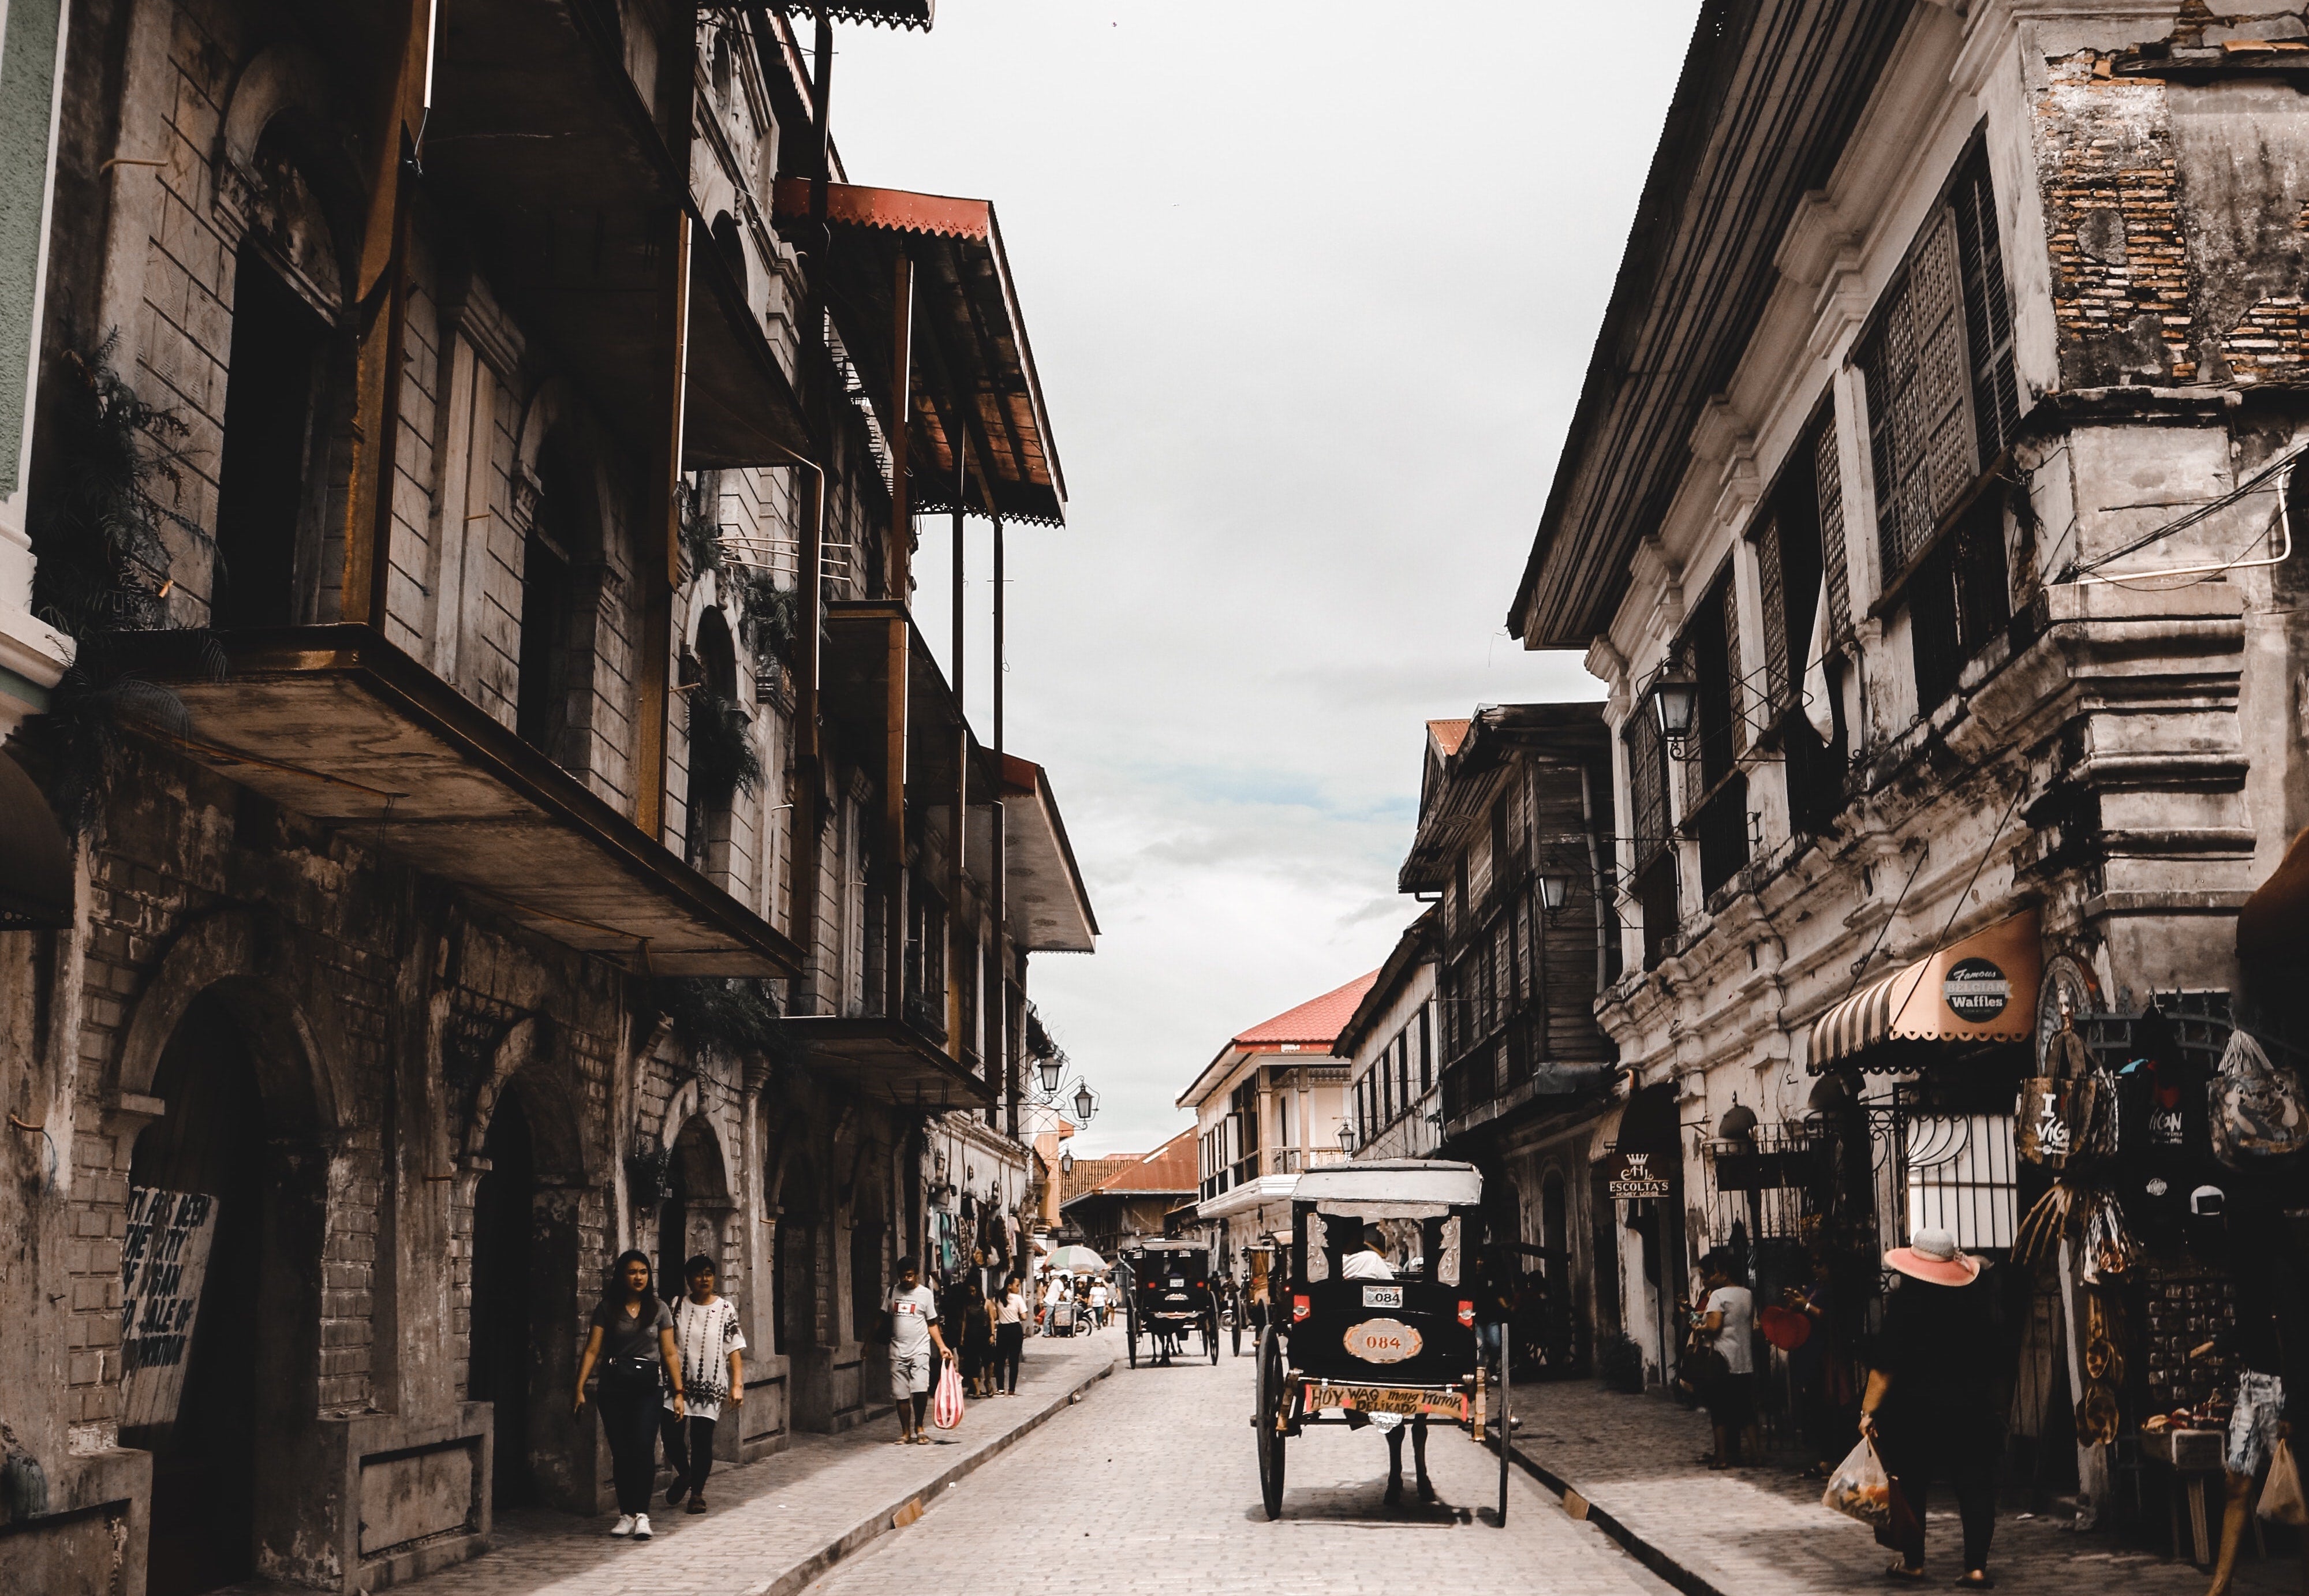 Vigan city, examples of colonial architecture and capiz windows. Photo credit Assy Gerez